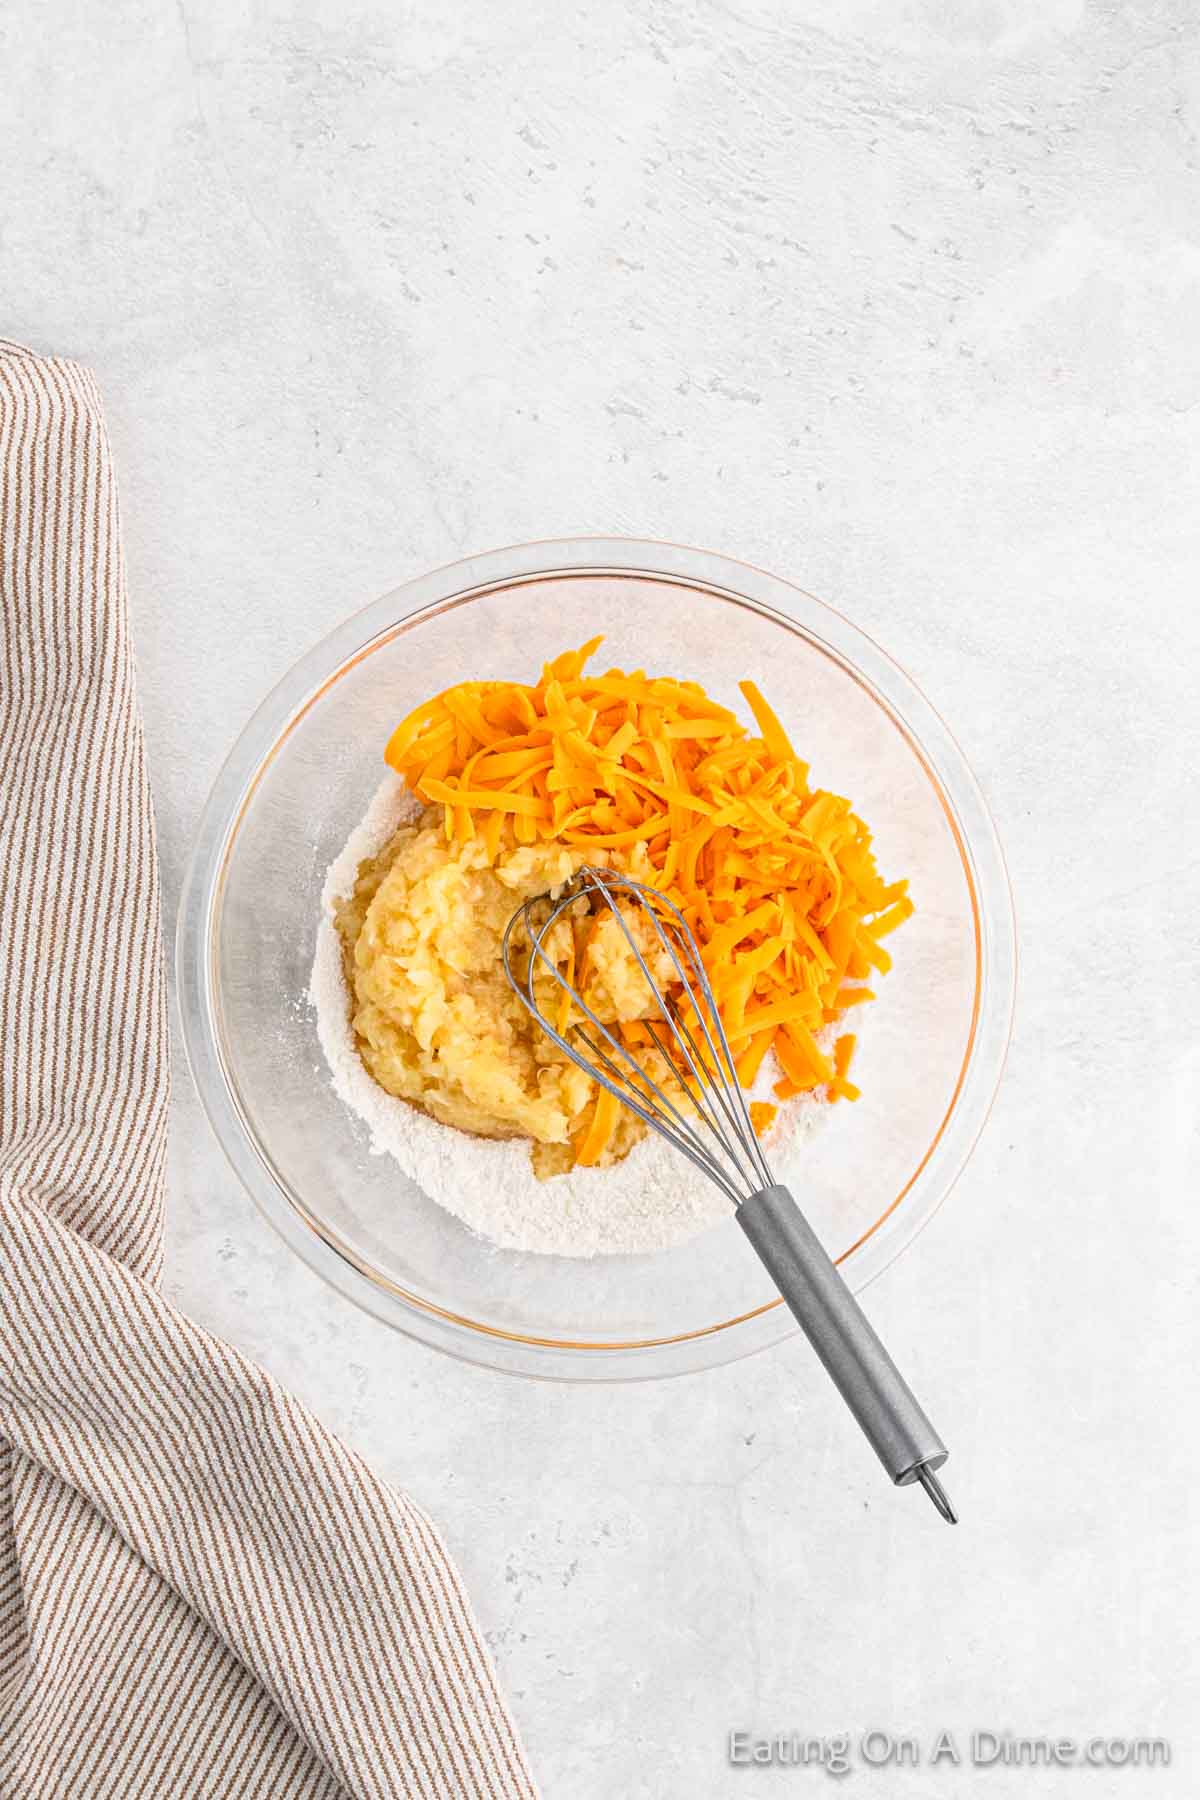 A glass mixing bowl contains shredded cheddar cheese on top of a flour and mashed potato mixture. A whisk rests in the bowl, ready to mix the ingredients for a delicious Pineapple Casserole. A beige striped kitchen towel is placed beside the bowl on a textured white surface.